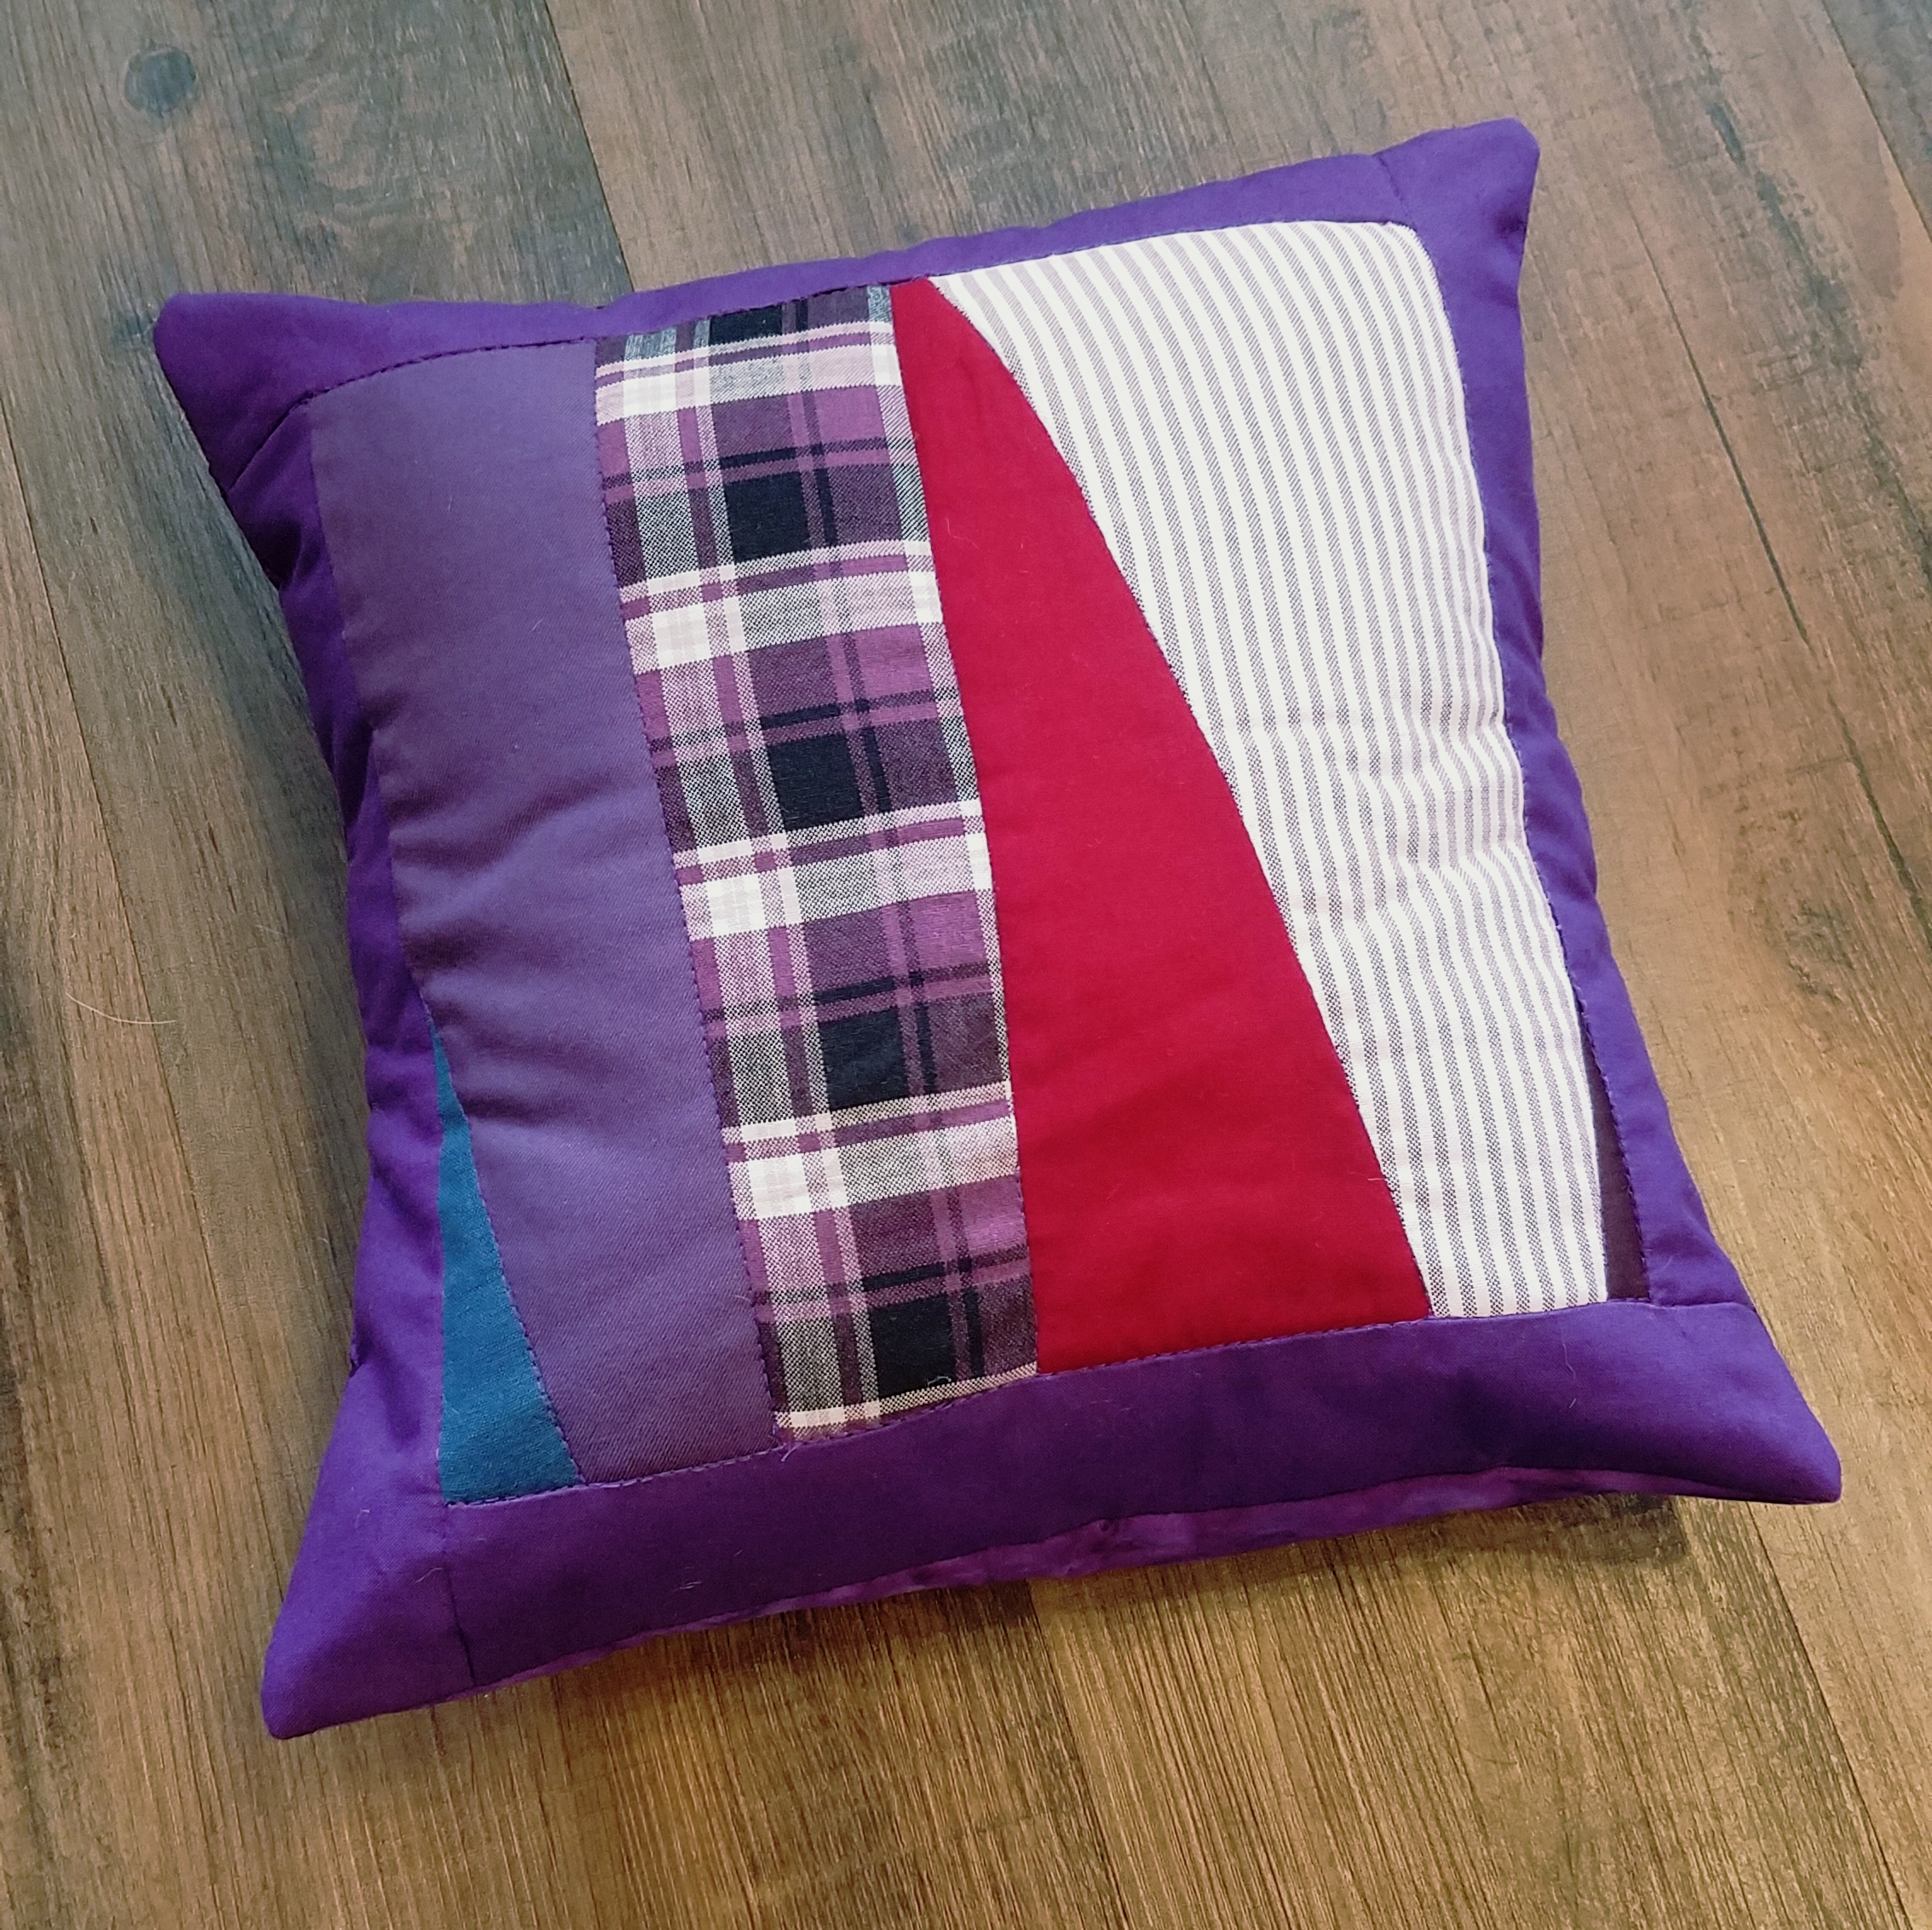  Pillow front. 